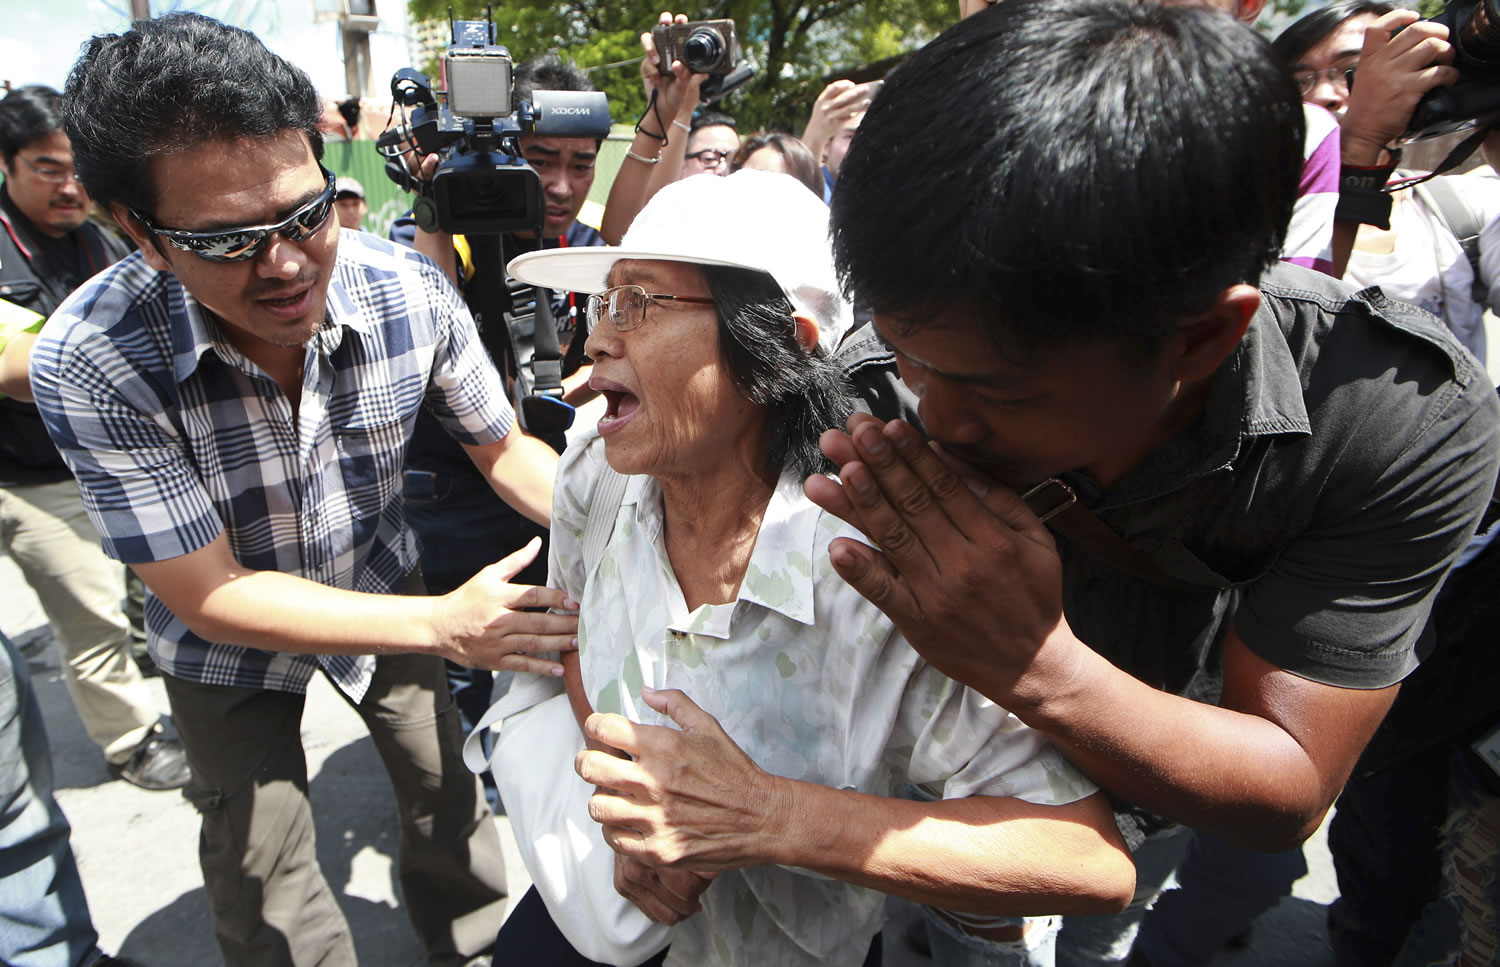 A protester, center, is arrested by plainclothes Thai police officers after staging an anti-coup demonstration in Bangkok, Thailand Sunday, June 1, 2014. An anti-coup activist in Thailand called Friday for a weekend rally to defy the military government's ban on demonstrations, urging those opposed to the takeover to wear masks and be ready for cat-and-mouse chases with soldiers in the capital.